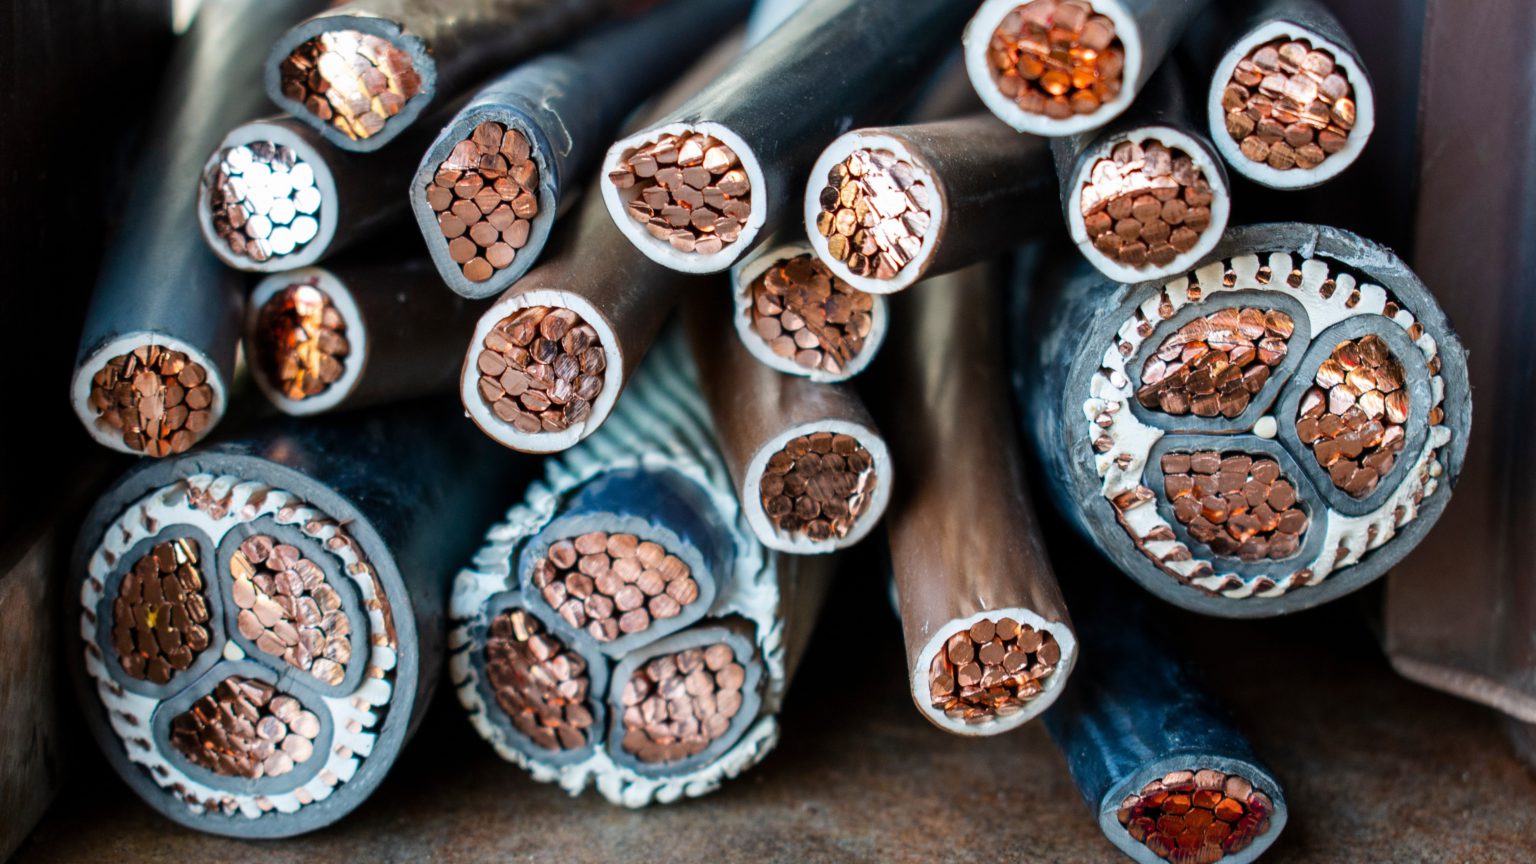 Net zero climate target could fail without more copper supply